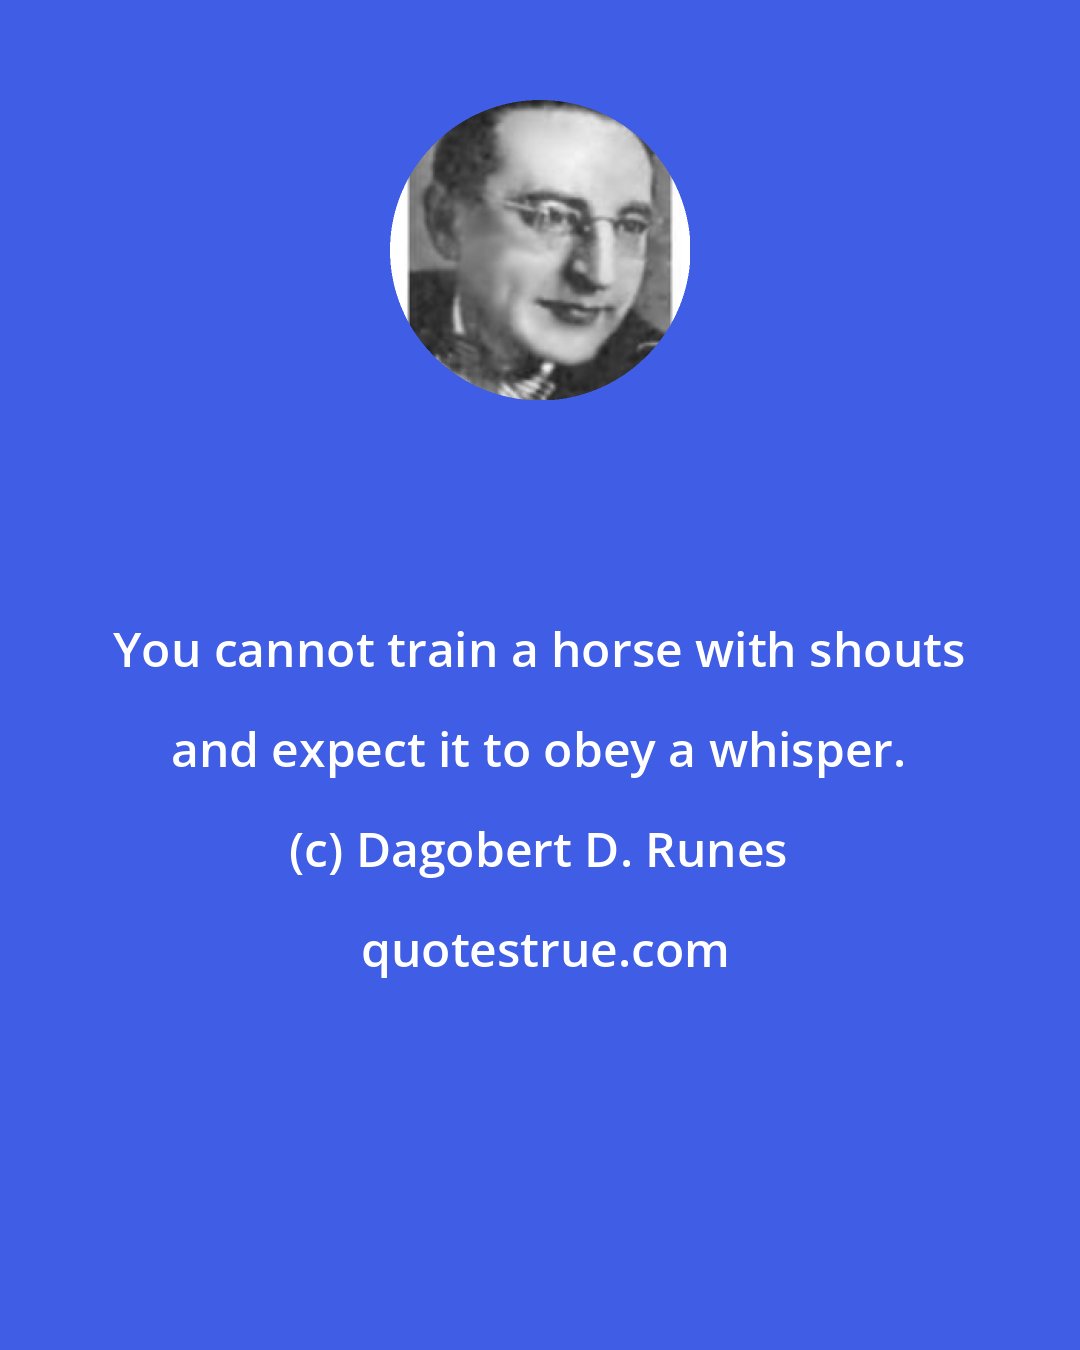 Dagobert D. Runes: You cannot train a horse with shouts and expect it to obey a whisper.